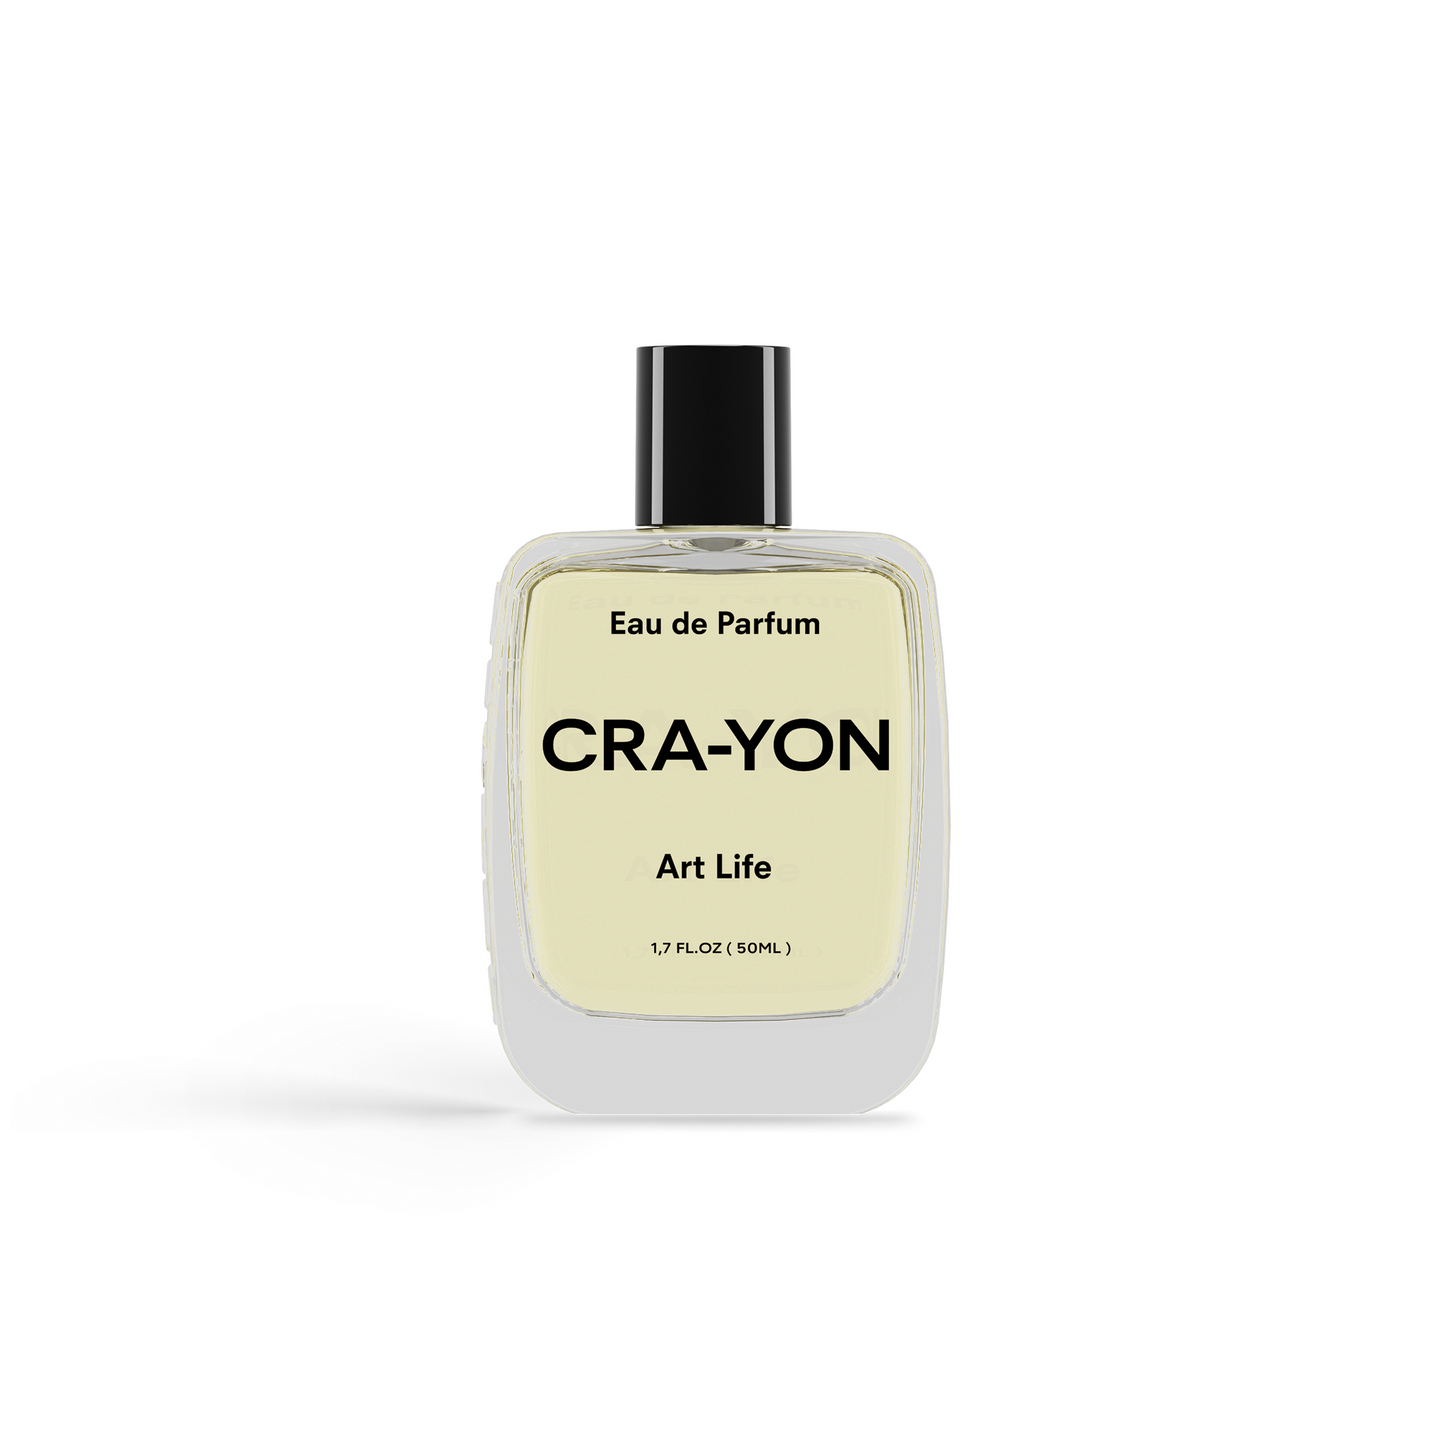 Art Life 50ml EDP by CRA-YON Parfums. Try it, you will  like it.-image